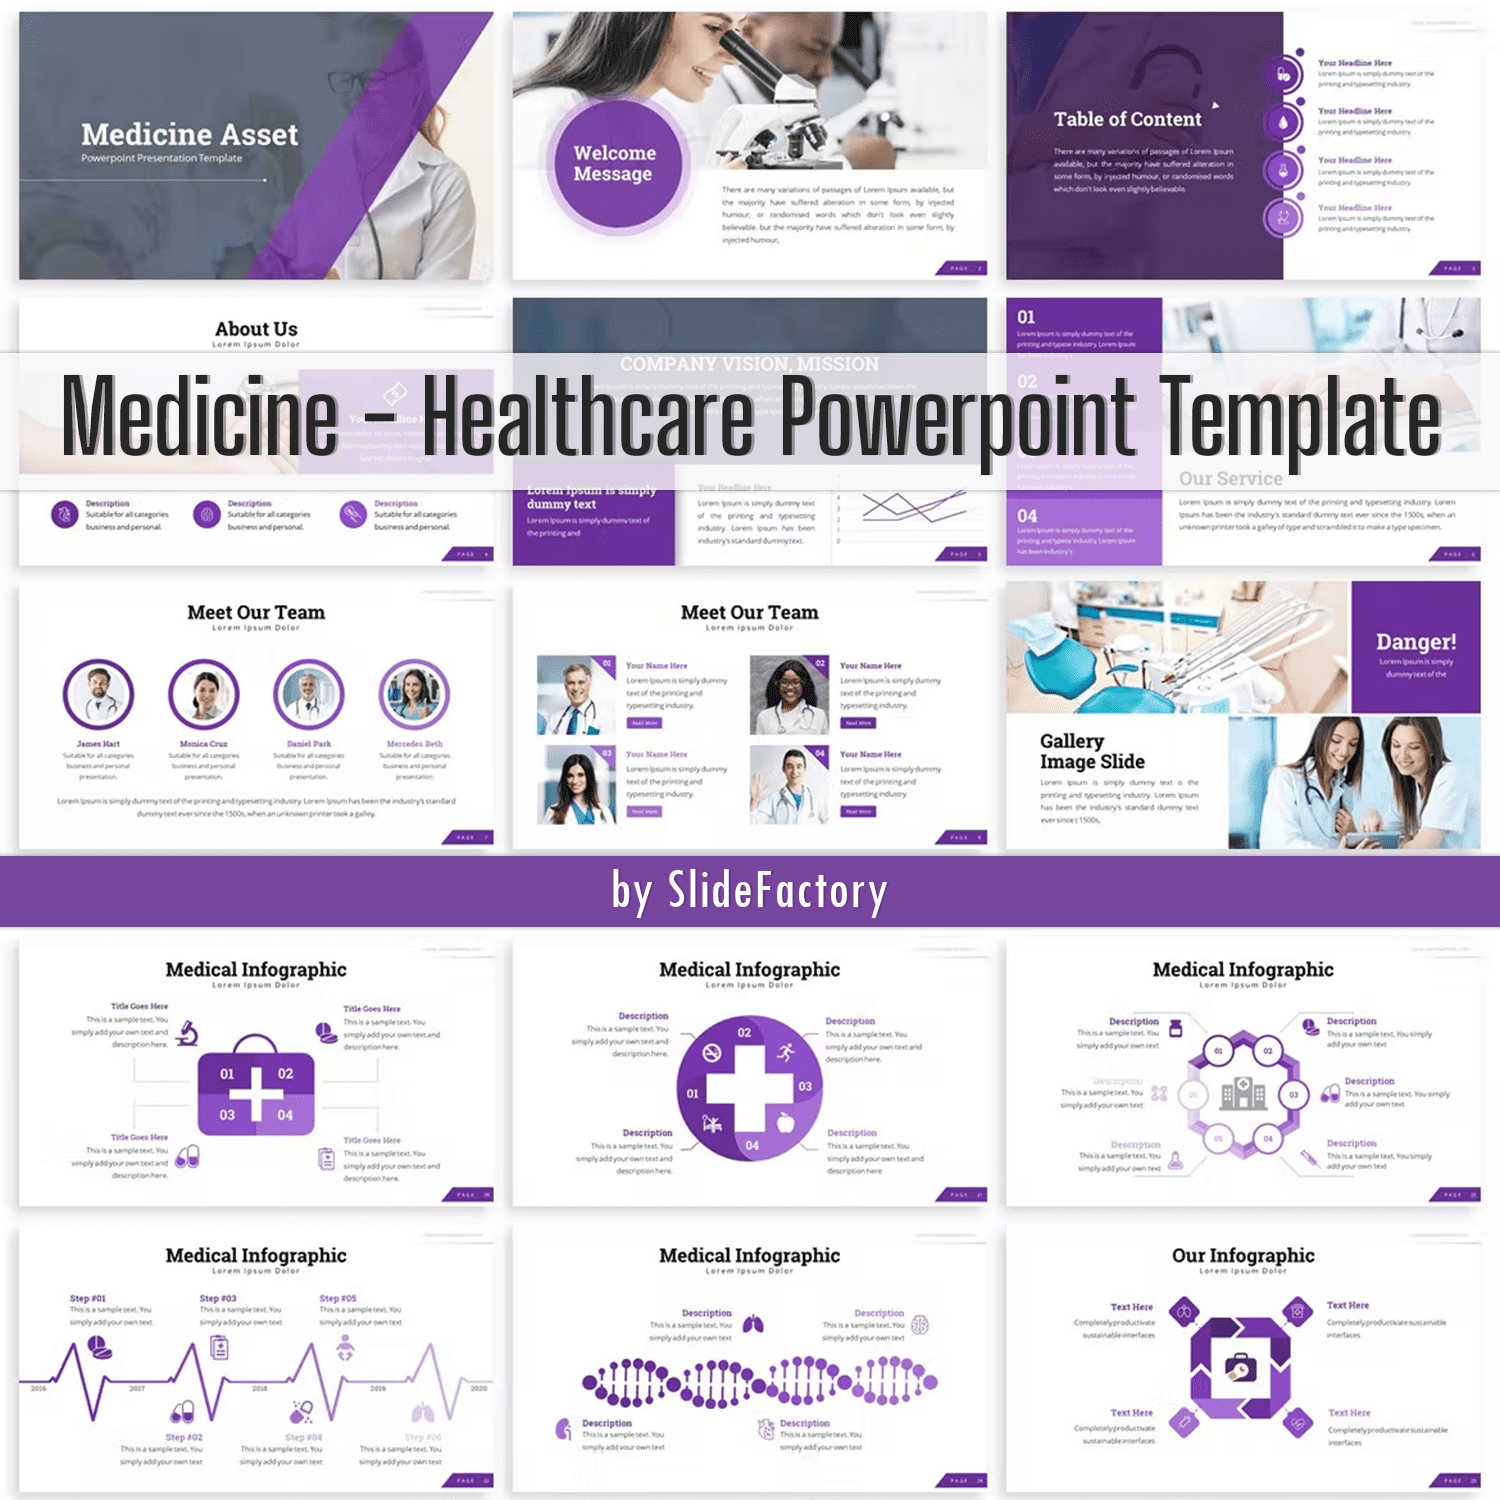 Team of the Medicine - Healthcare Powerpoint Template.